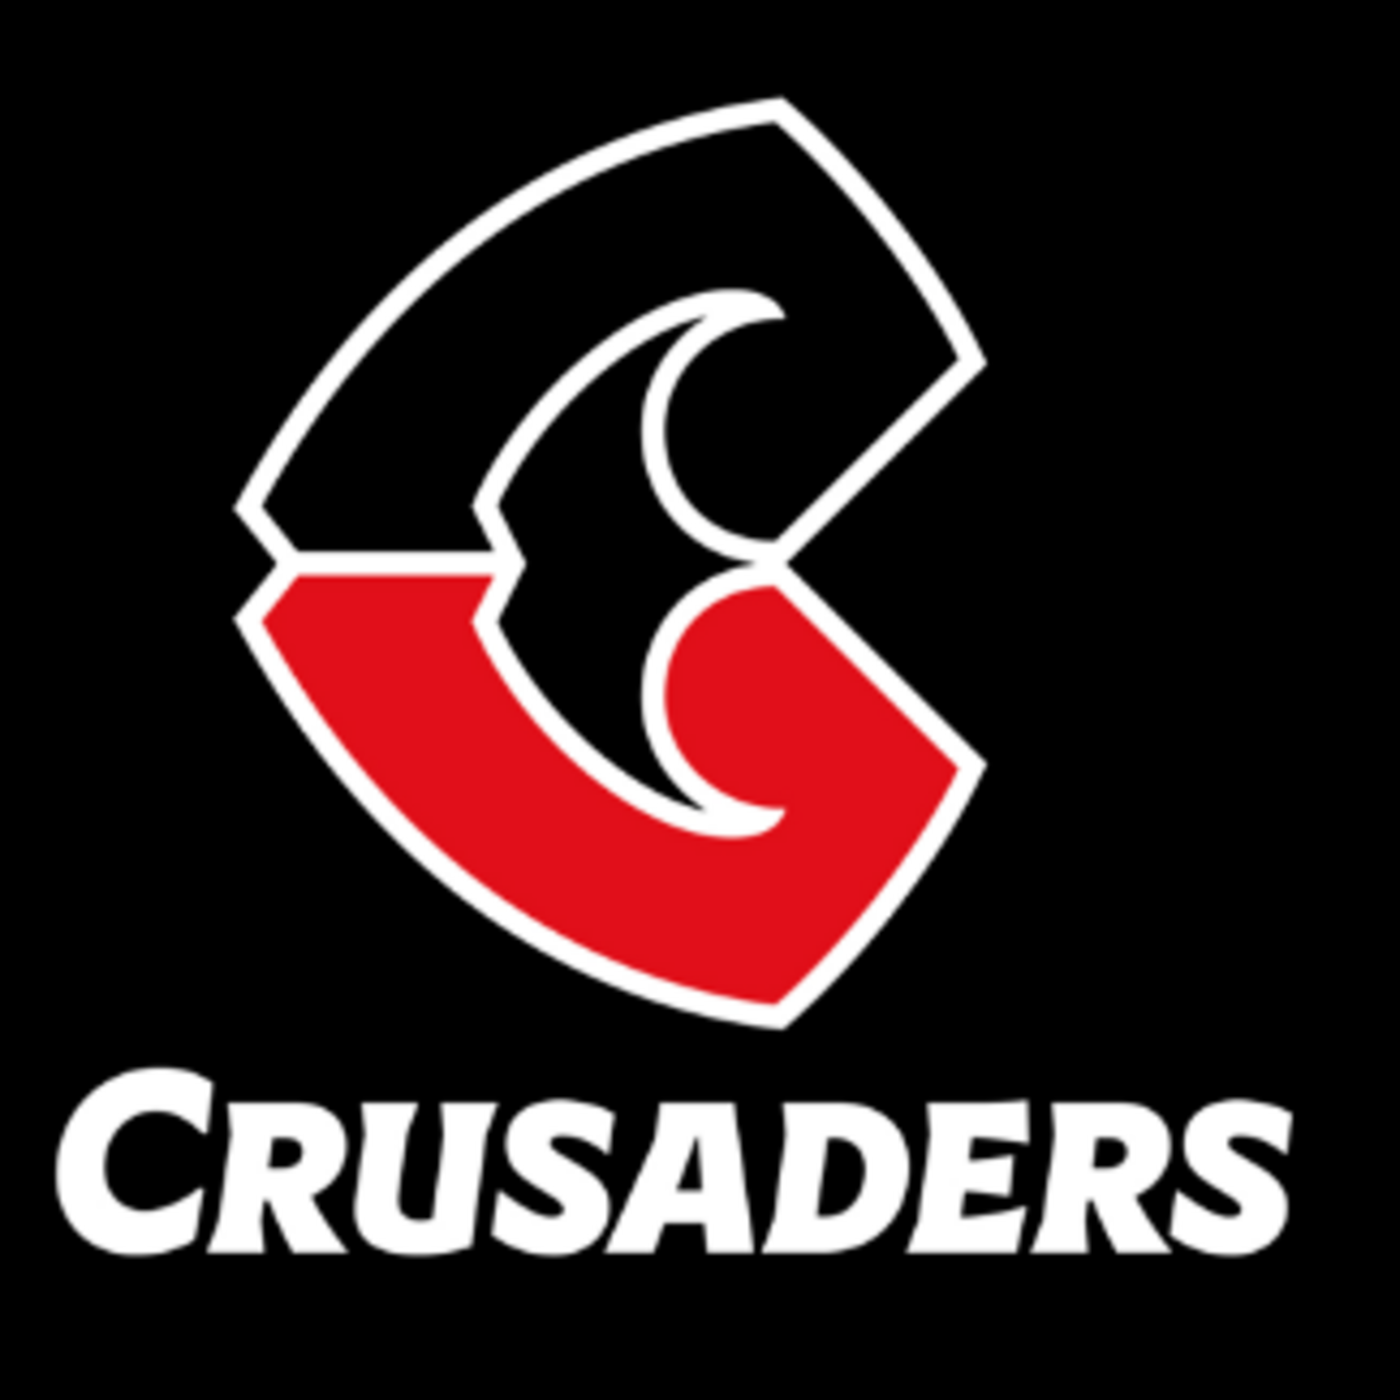 Episode 114: Kaila Colbin & Shane Fletcher, Ep. 114, Working for the Crusaders